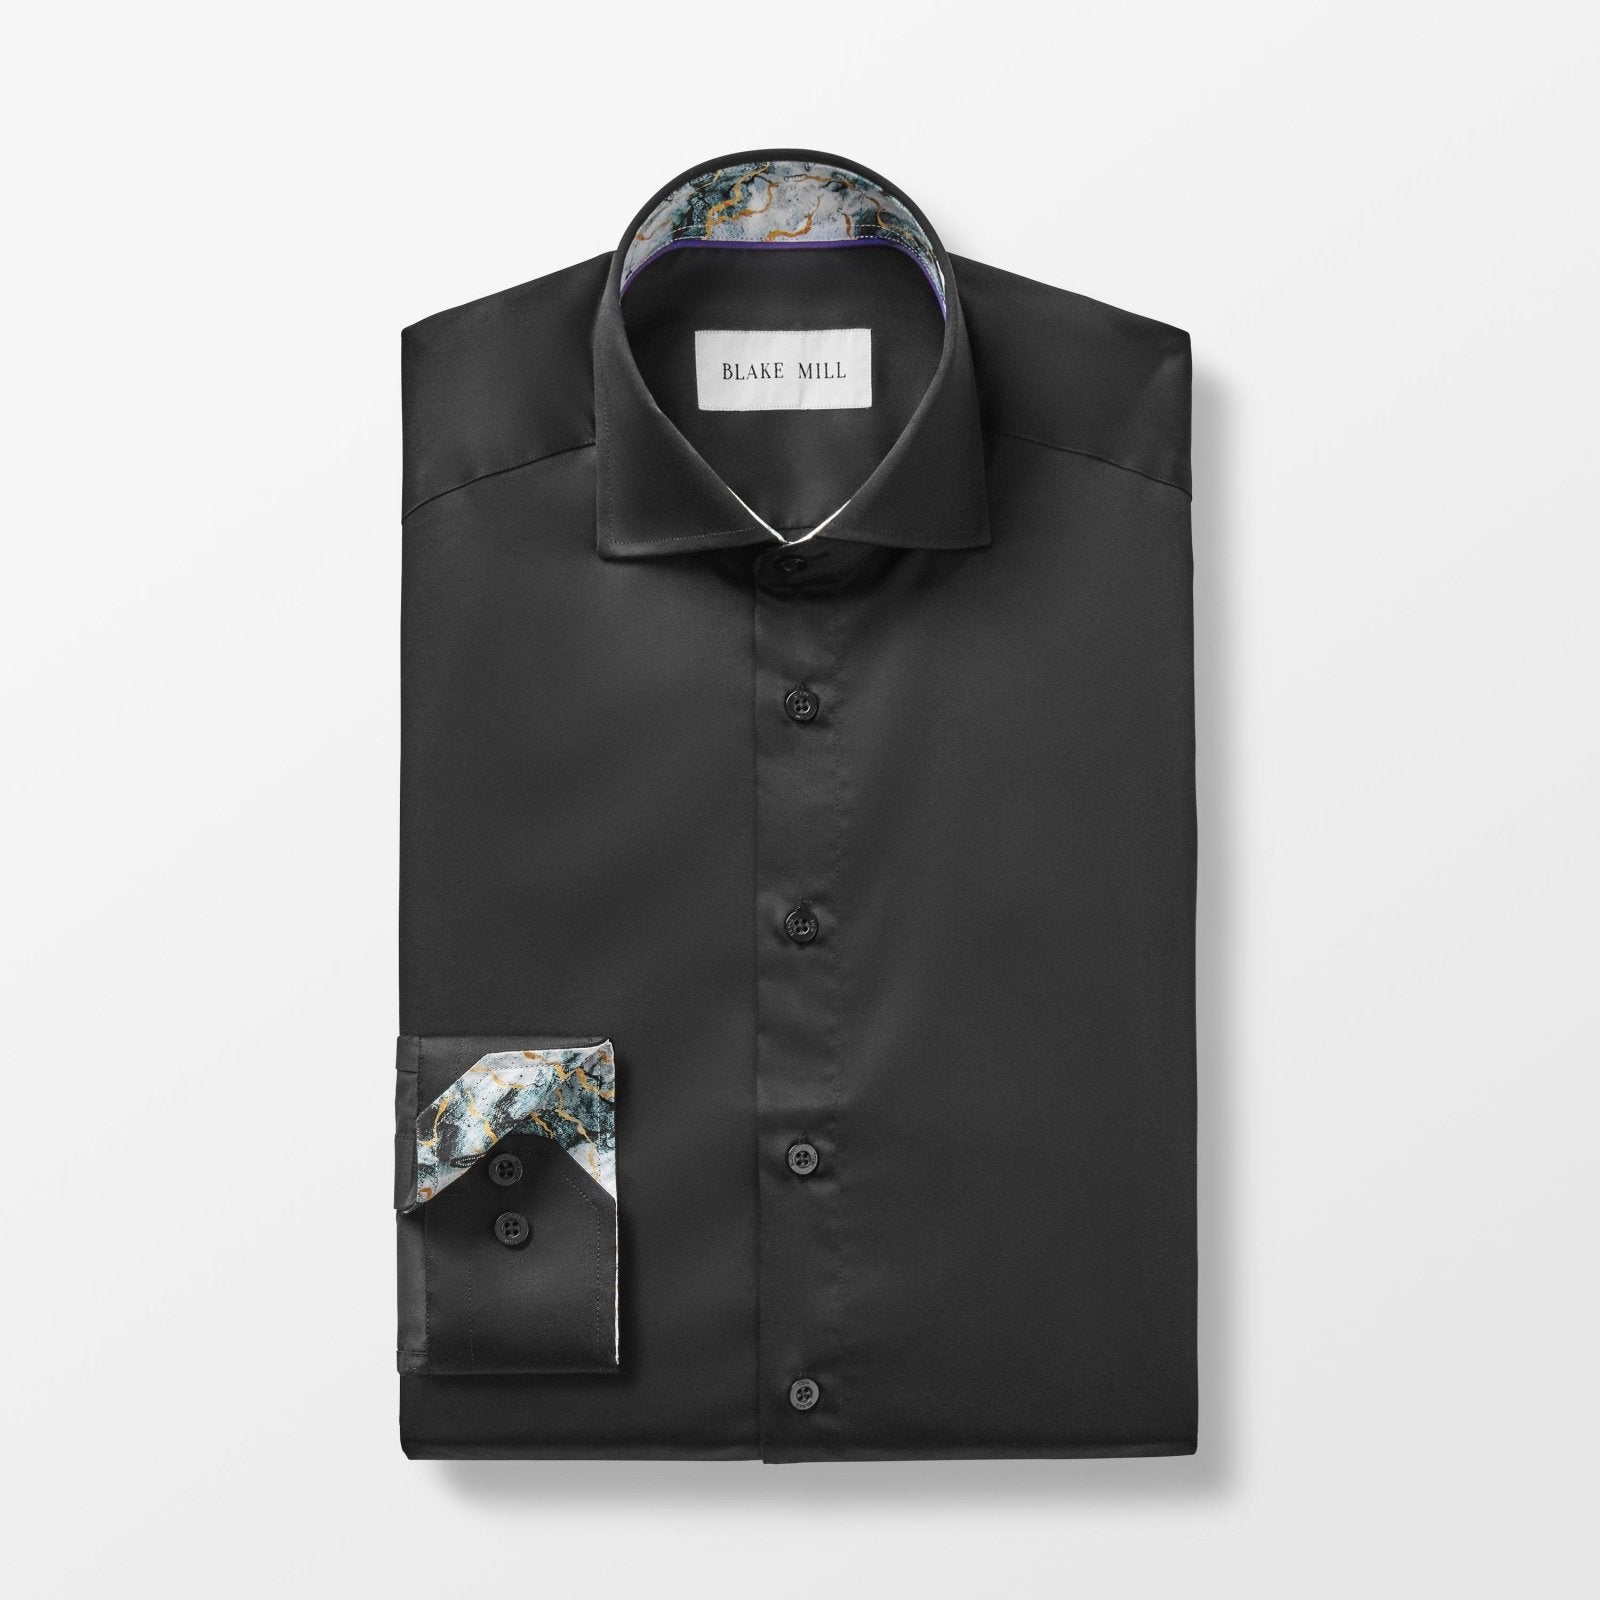 Black with Thunderstorm Accents Shirt - Blake Mill